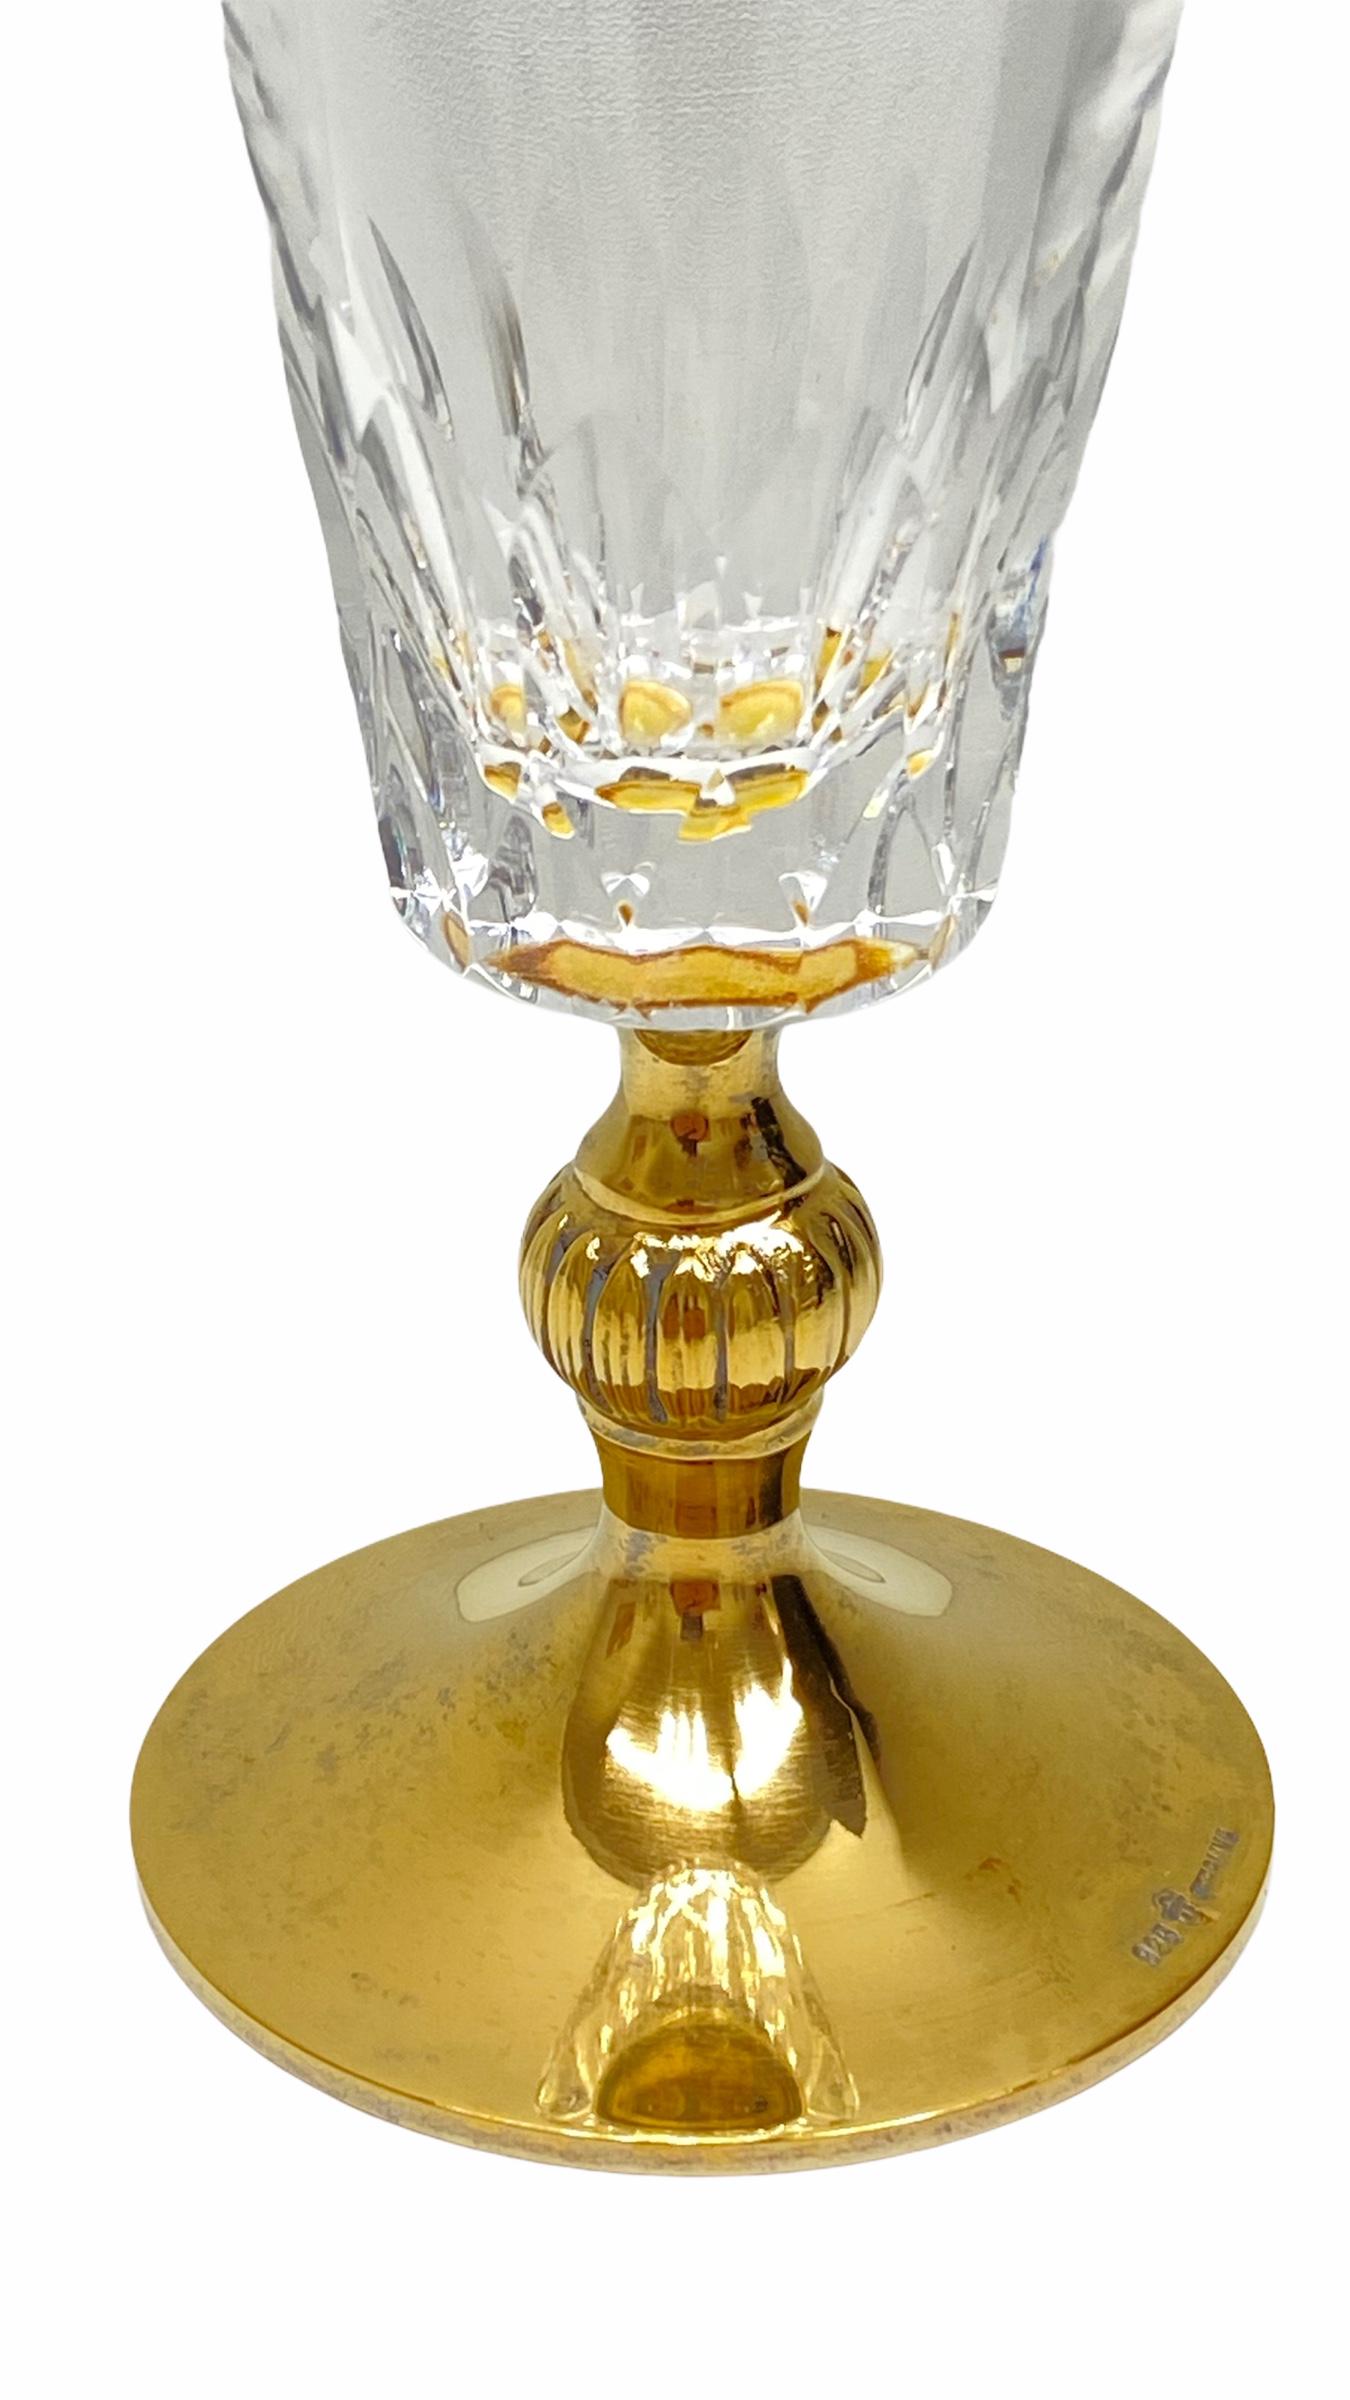 A beautiful crystal glass with gold-plated sterling silver stem, found at an estate sale in Austria. Very good vintage condition, consistent with age and use. Marked with Sterling and 925. No chips, no cracks, no repairs.